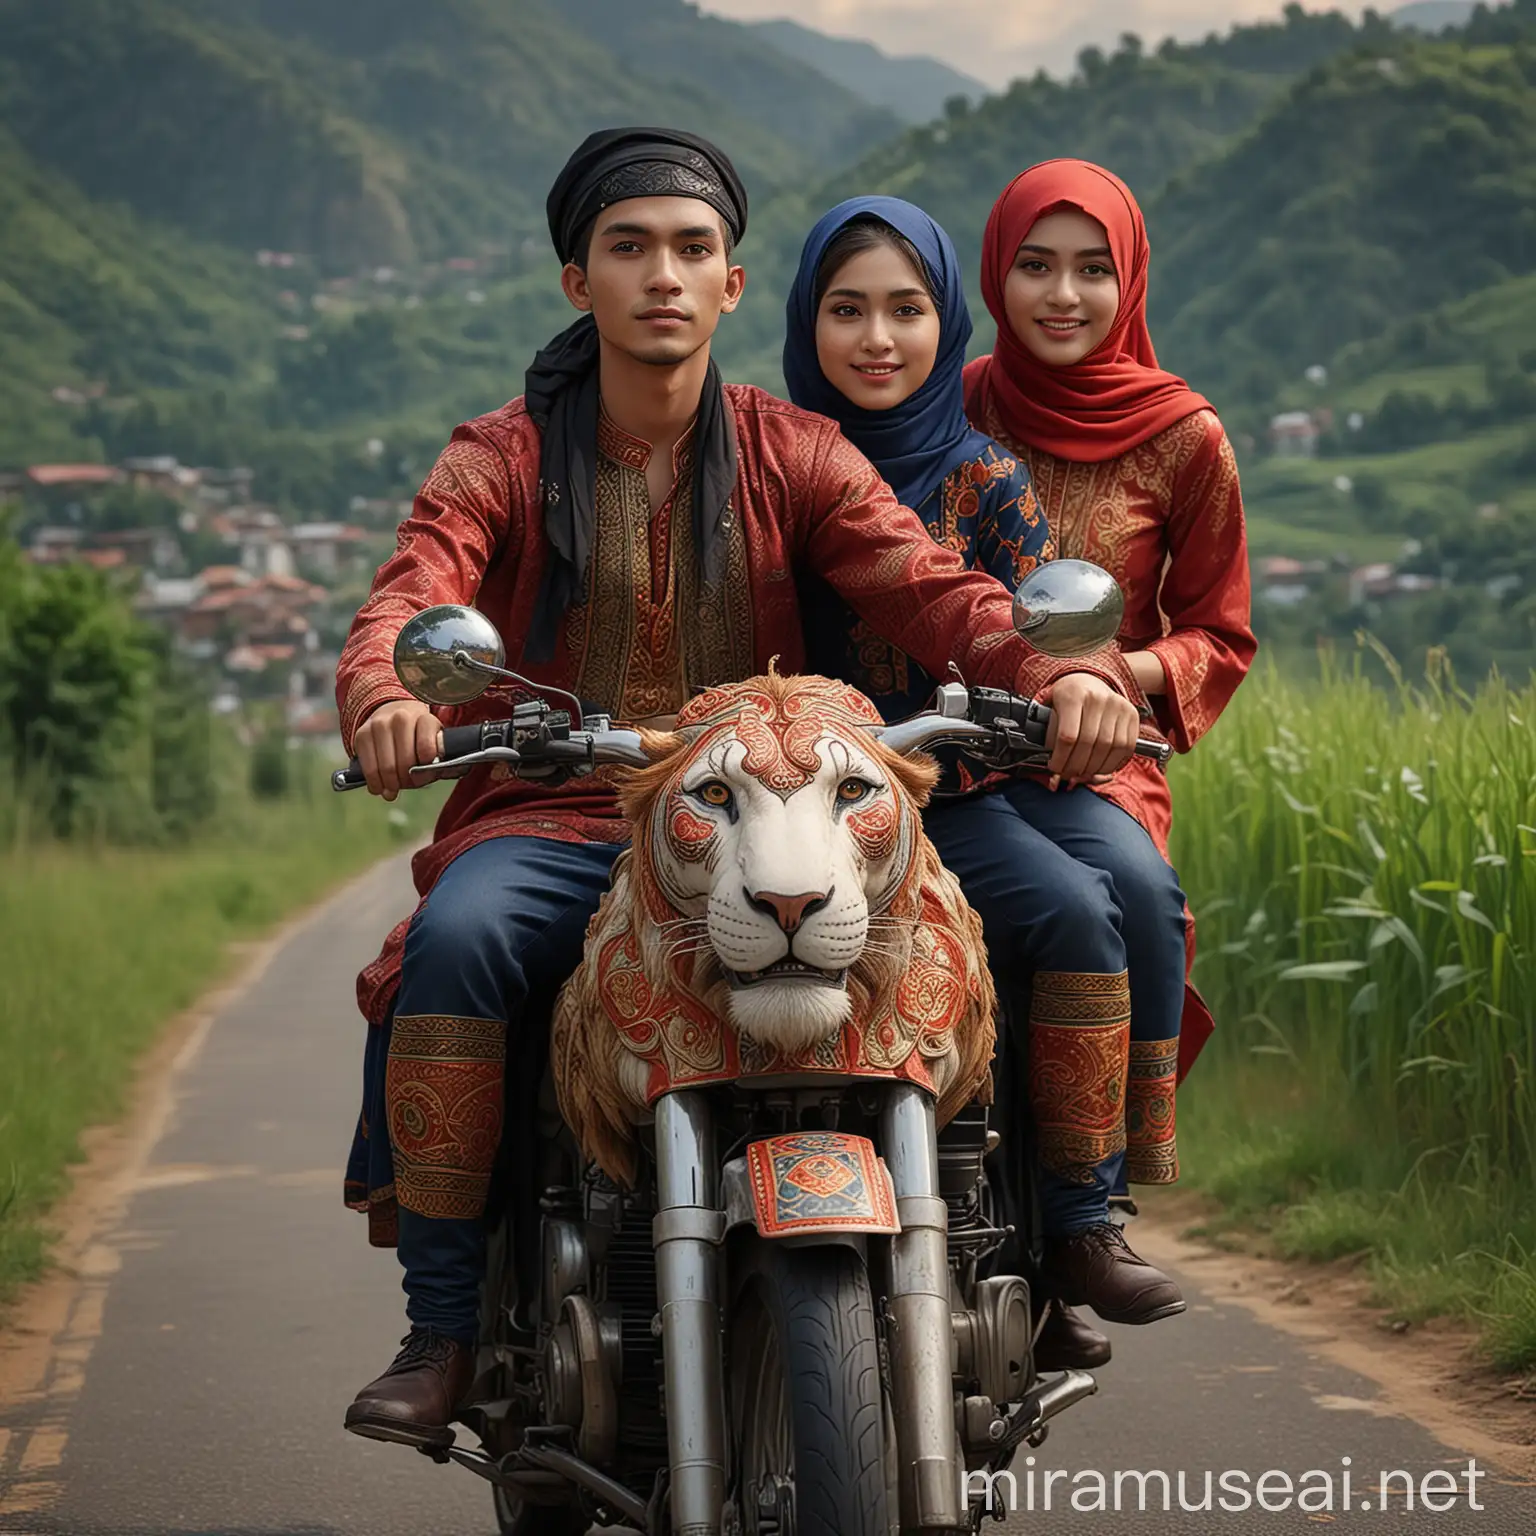 Young Man Riding Mythical CreatureInspired Motorbike with Two Women in Hijabs through Green Fields